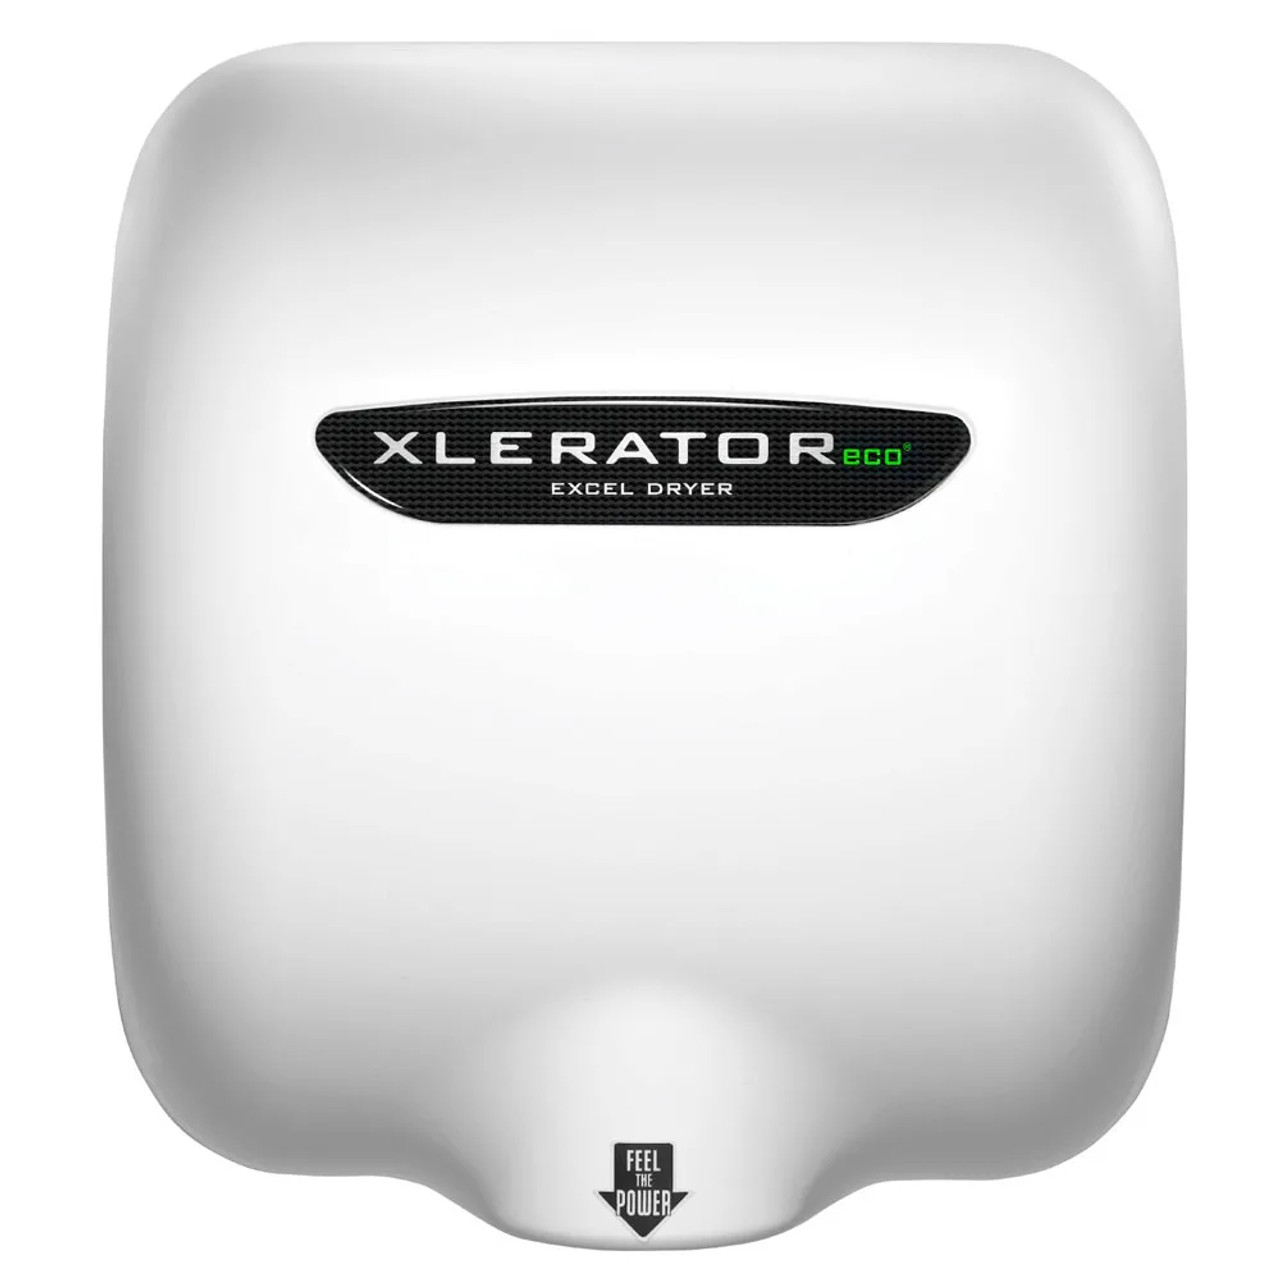 Excel Dryer Automatic Hand Dryer - 10 Second Dry Time, White, 110-120V - Chicken Pieces